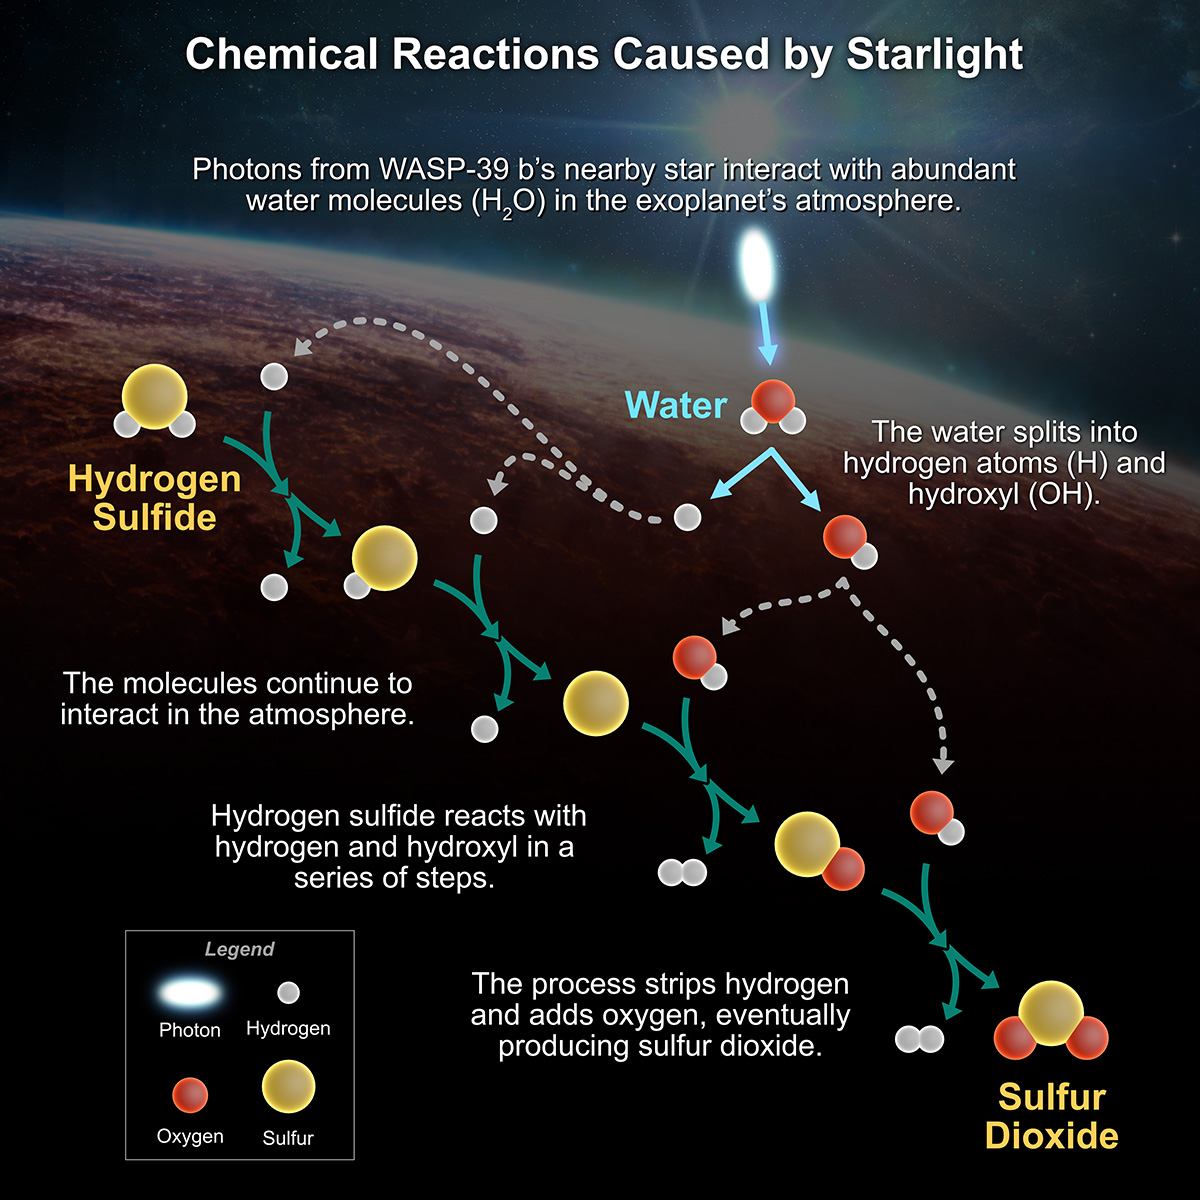 An infographic is headlined, Chemical Reactions Caused by Starlight. It shows an illustration of the surface of a reddish exoplanet beneath its star. Light from the star shines into the chemical reaction portrayed in the graphic. Here, you can see molecules interacting and forming new compounds.Photons from WASP-39 b’s nearby star interact with abundant water molecules (H2O) in the exoplanet’s atmosphere.The water splits into hydrogen atoms (H) and hydroxide (OH).The molecules continue to interact in the atmosphere.Hydrogen sulfide reacts with hydrogen and hydroxide in a series of steps. The process strips hydrogen and adds oxygen, eventually producing sulfur dioxide.